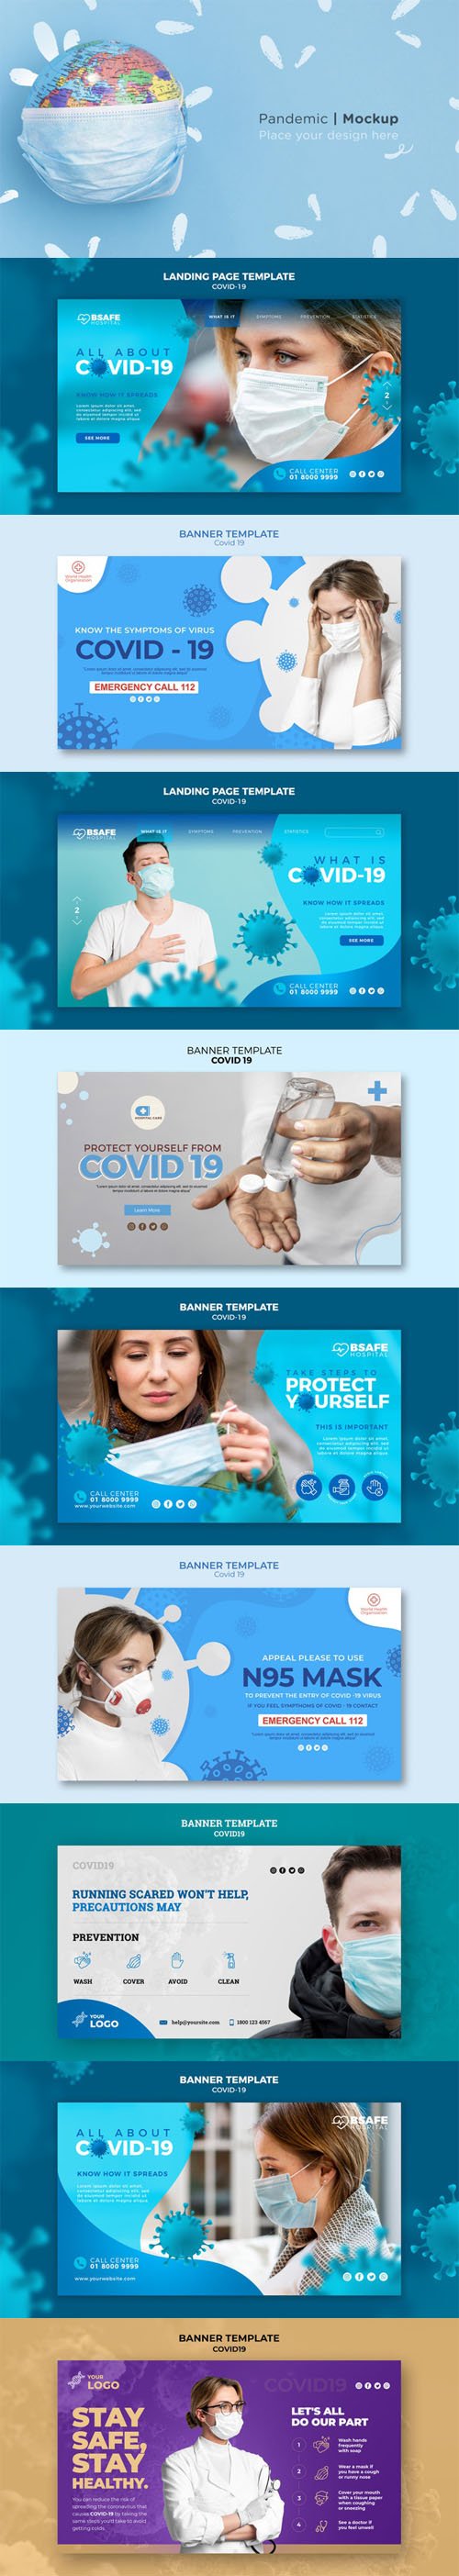 10 Covid-19 Concept Banners PSD Templates